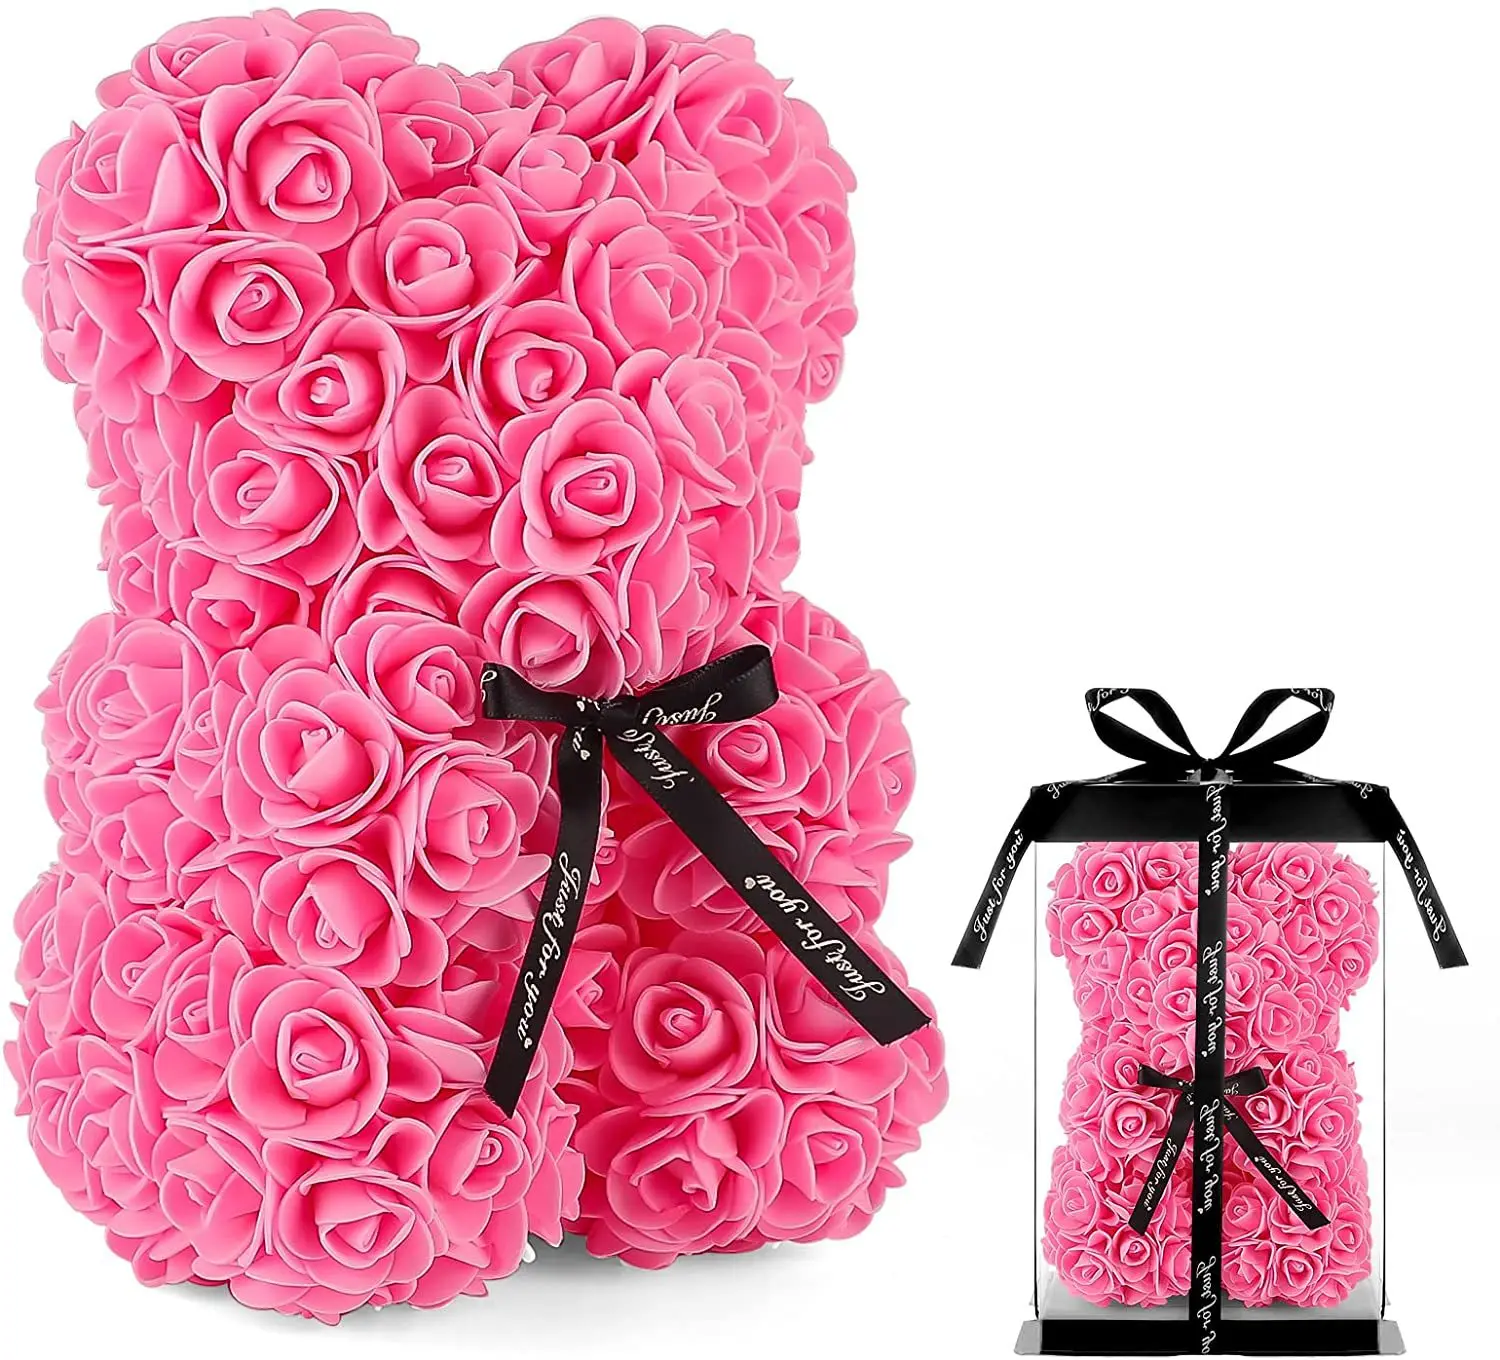 

Romantic Gift 25cm artificial Foam Flowers Rose Teddy Bear For valentine's day gift